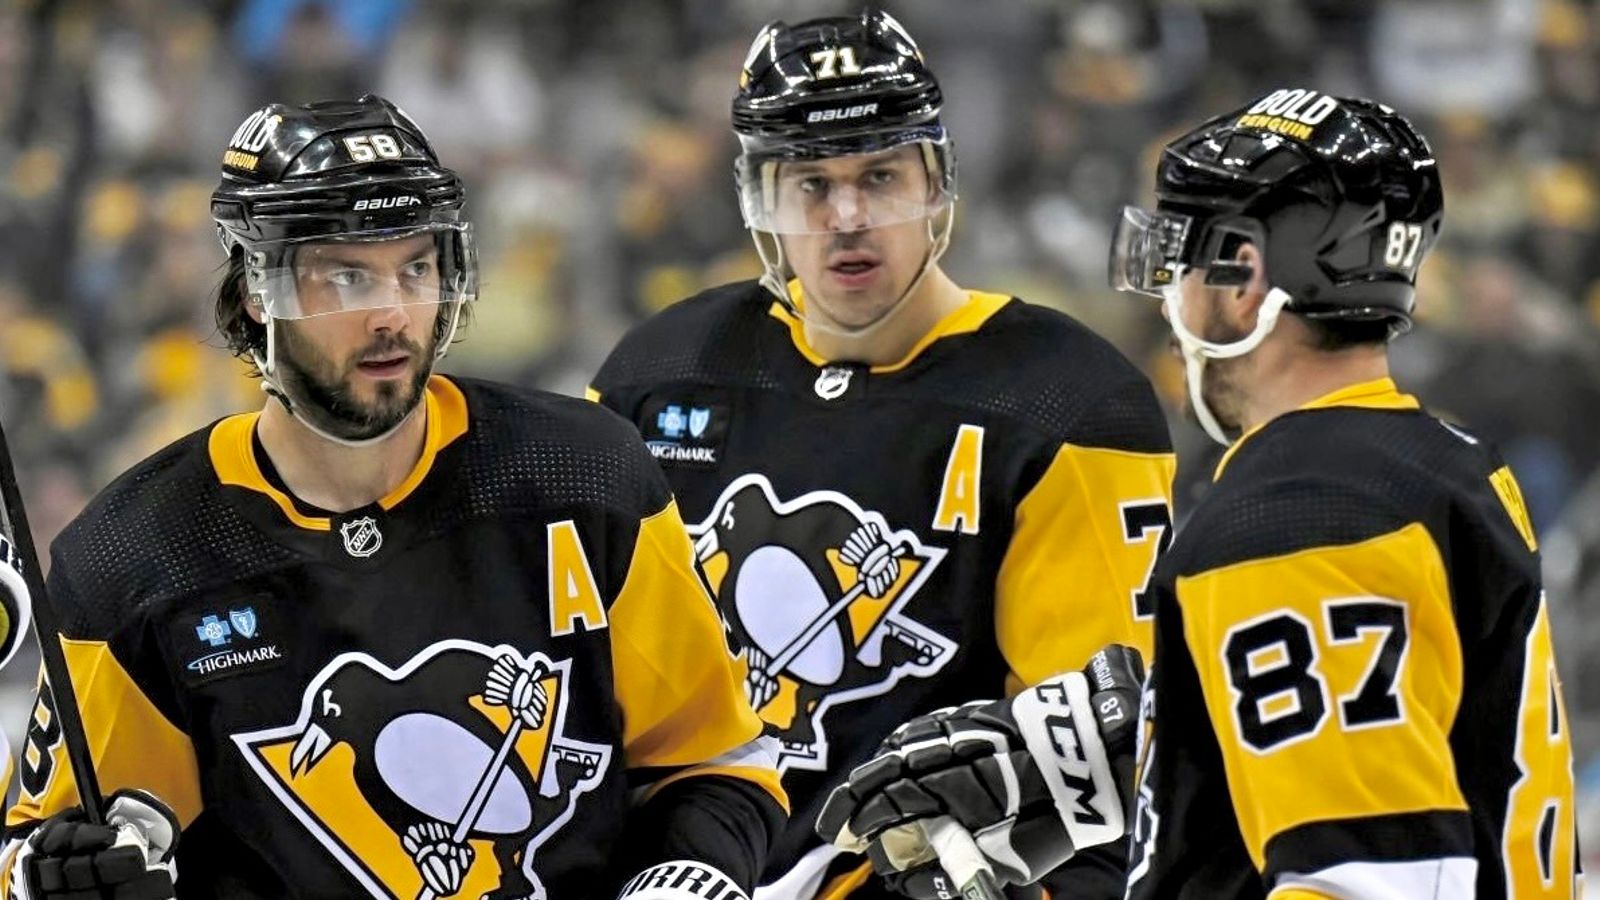 Sidney Crosby vs. Kris Letang: Who's in the Picture?